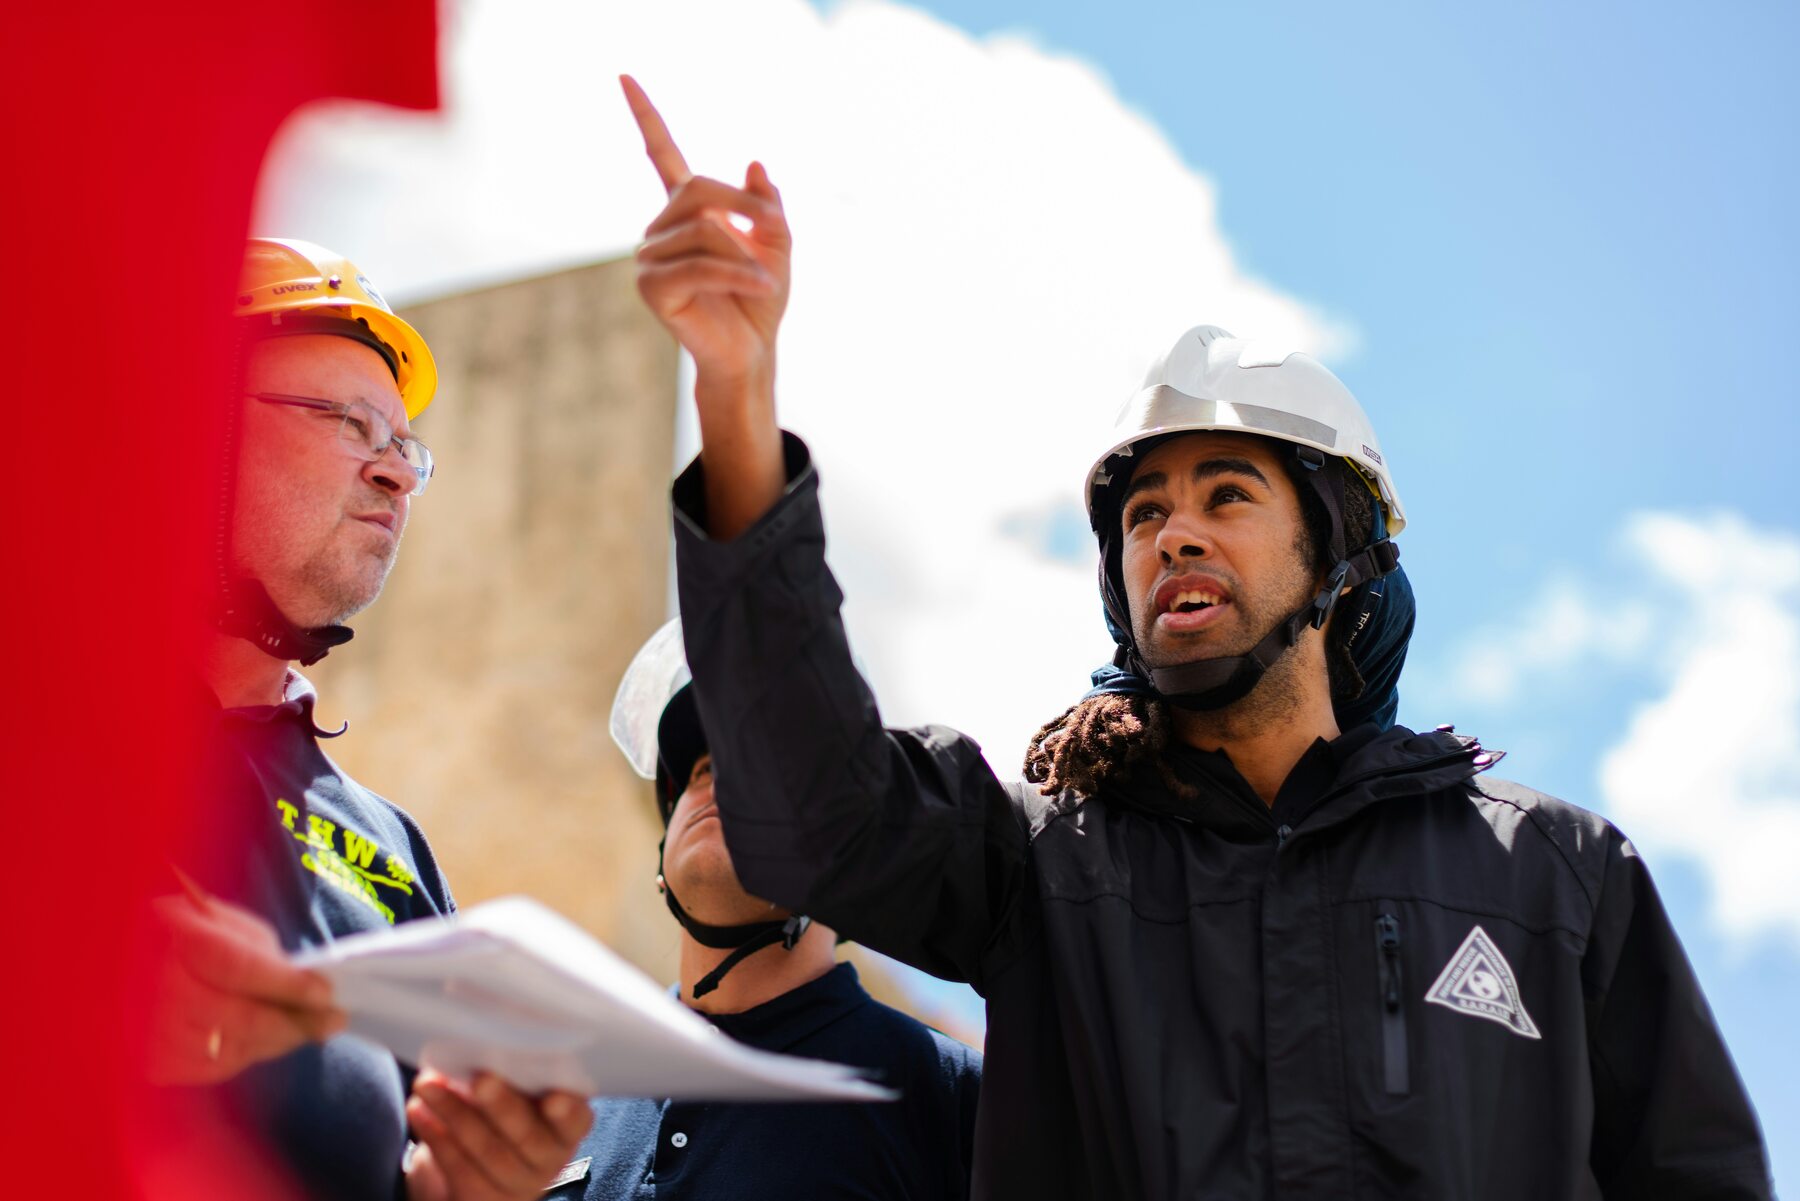 Men wearing protective hard hats during a site visit